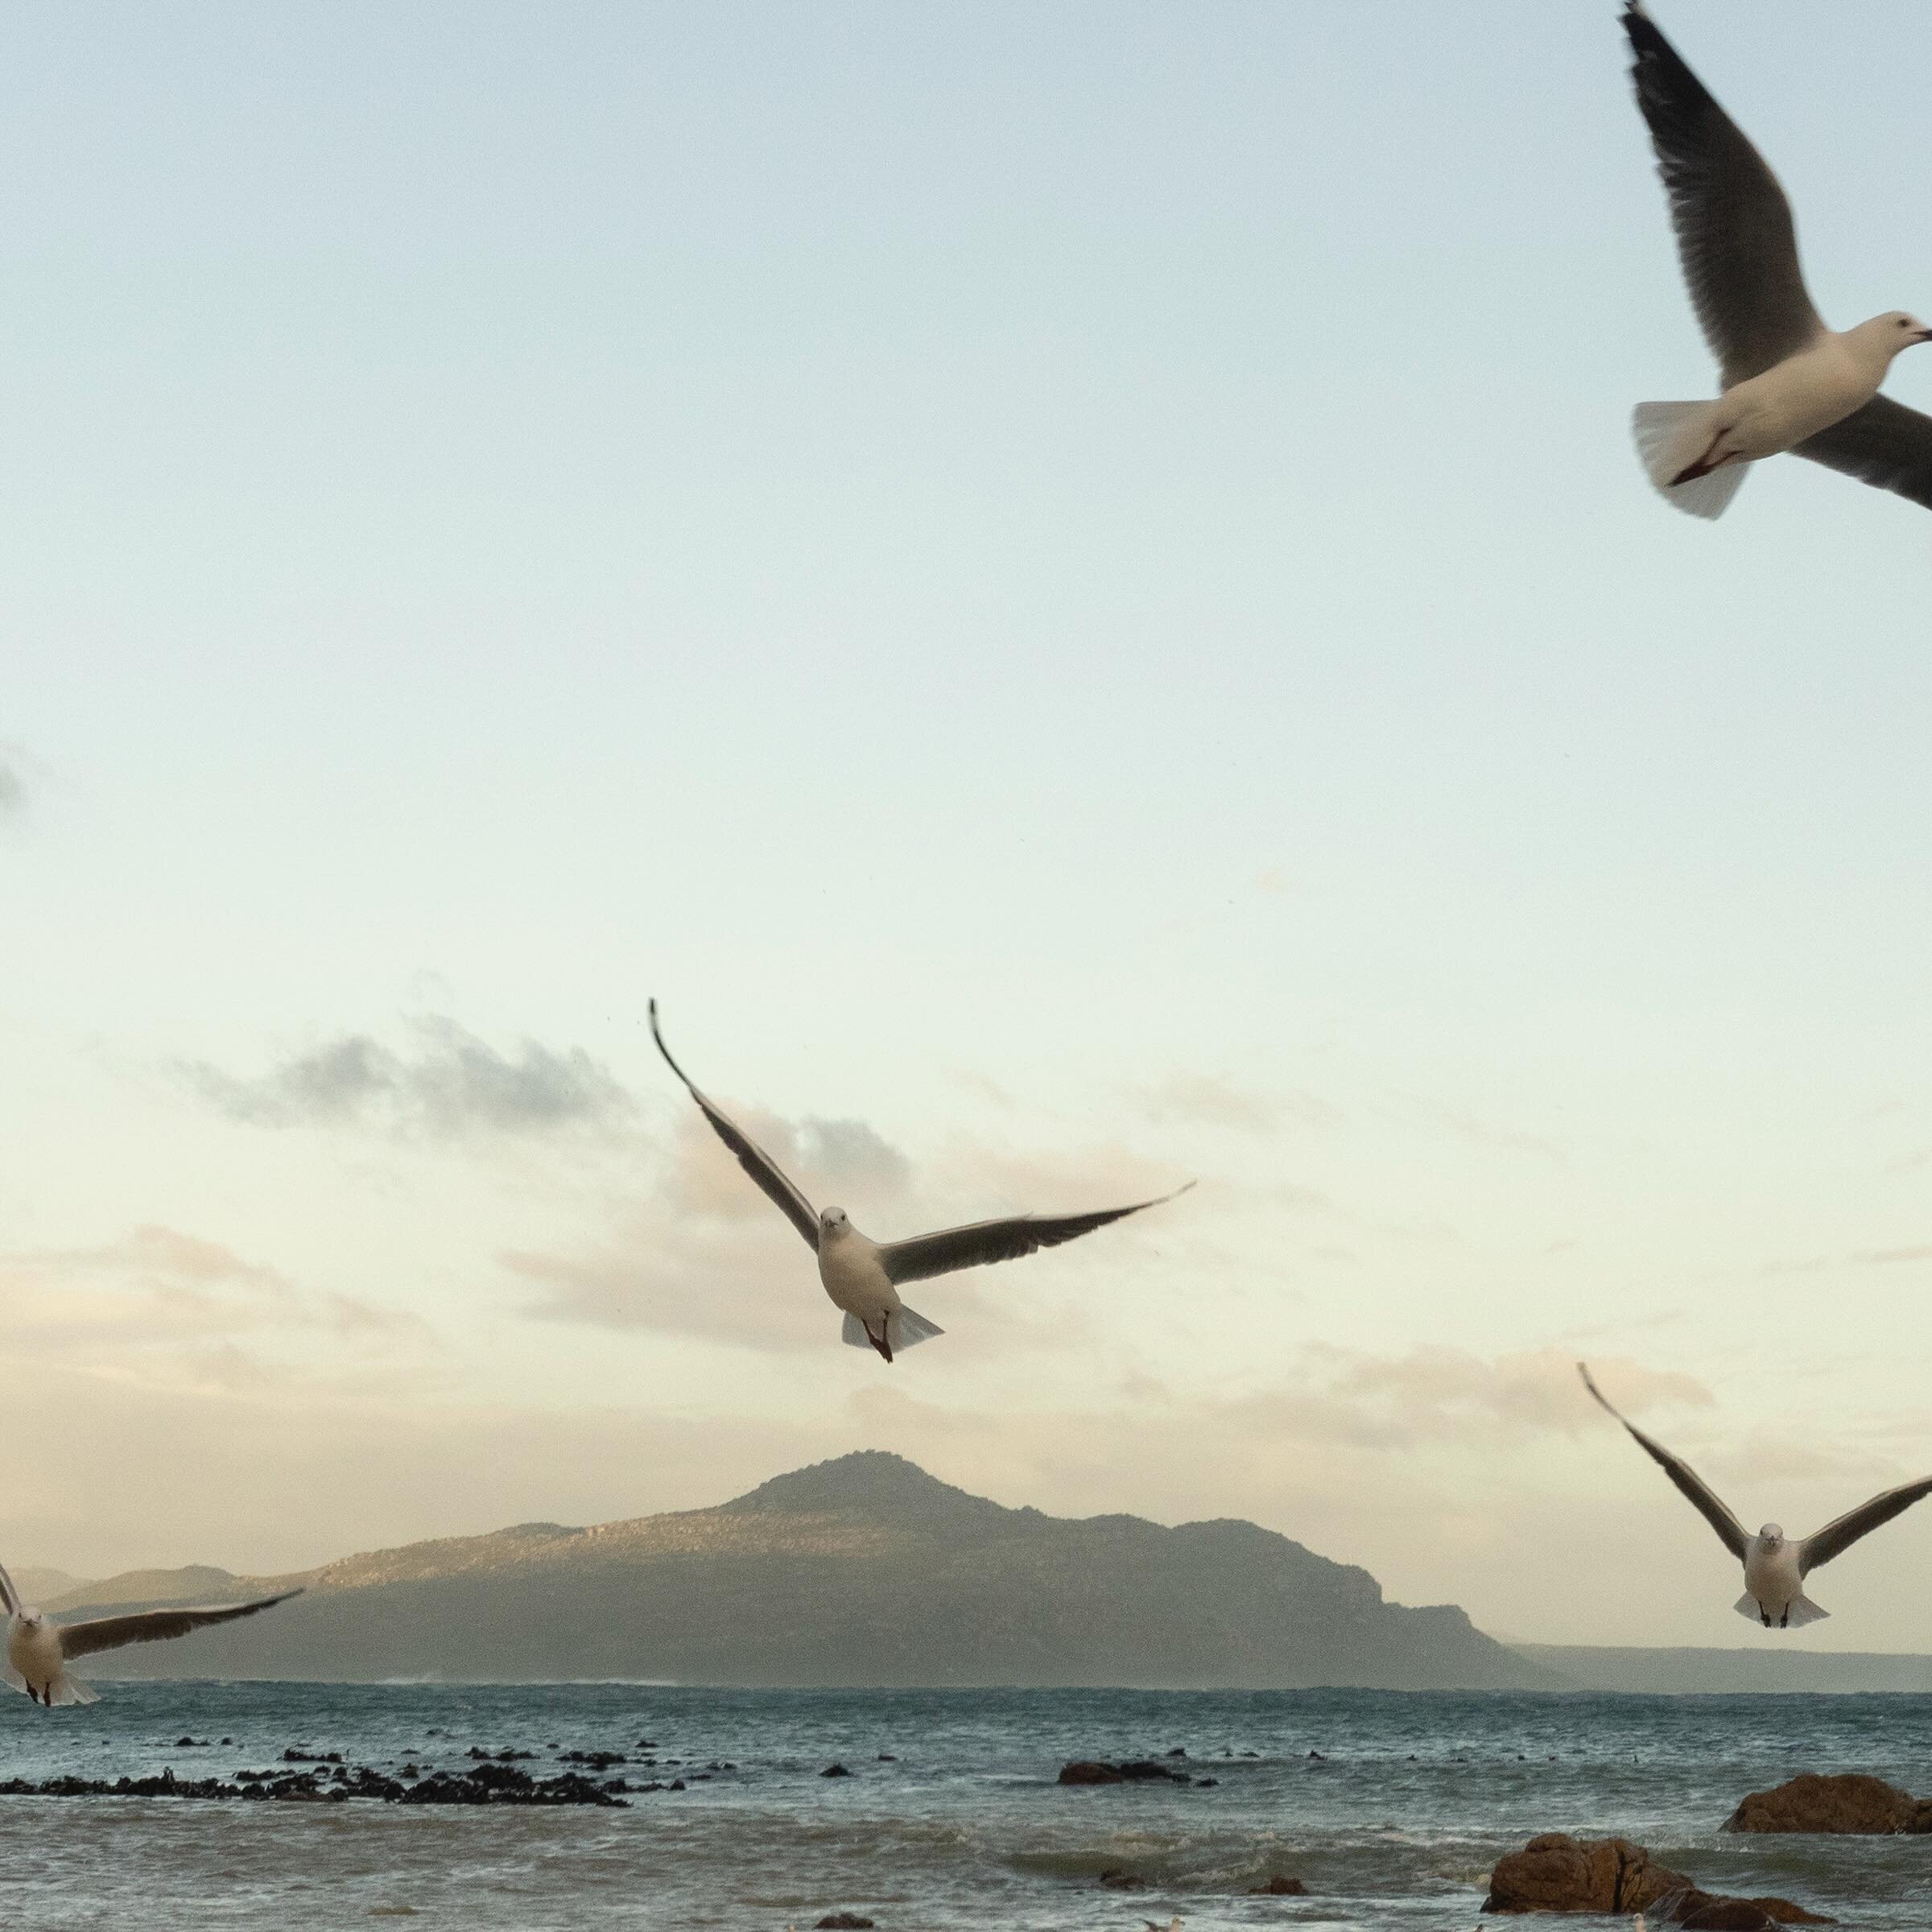 Seagulls feed at sunset next to kelp that has been washed up onto Witsand Beach outside of Cape Town, South Africa, June 16, 2023. Sea birds often use the kelp for nest sites. Adriane Ohanesian for the Bulletin of the Atomic Scientists

Text by Paul 